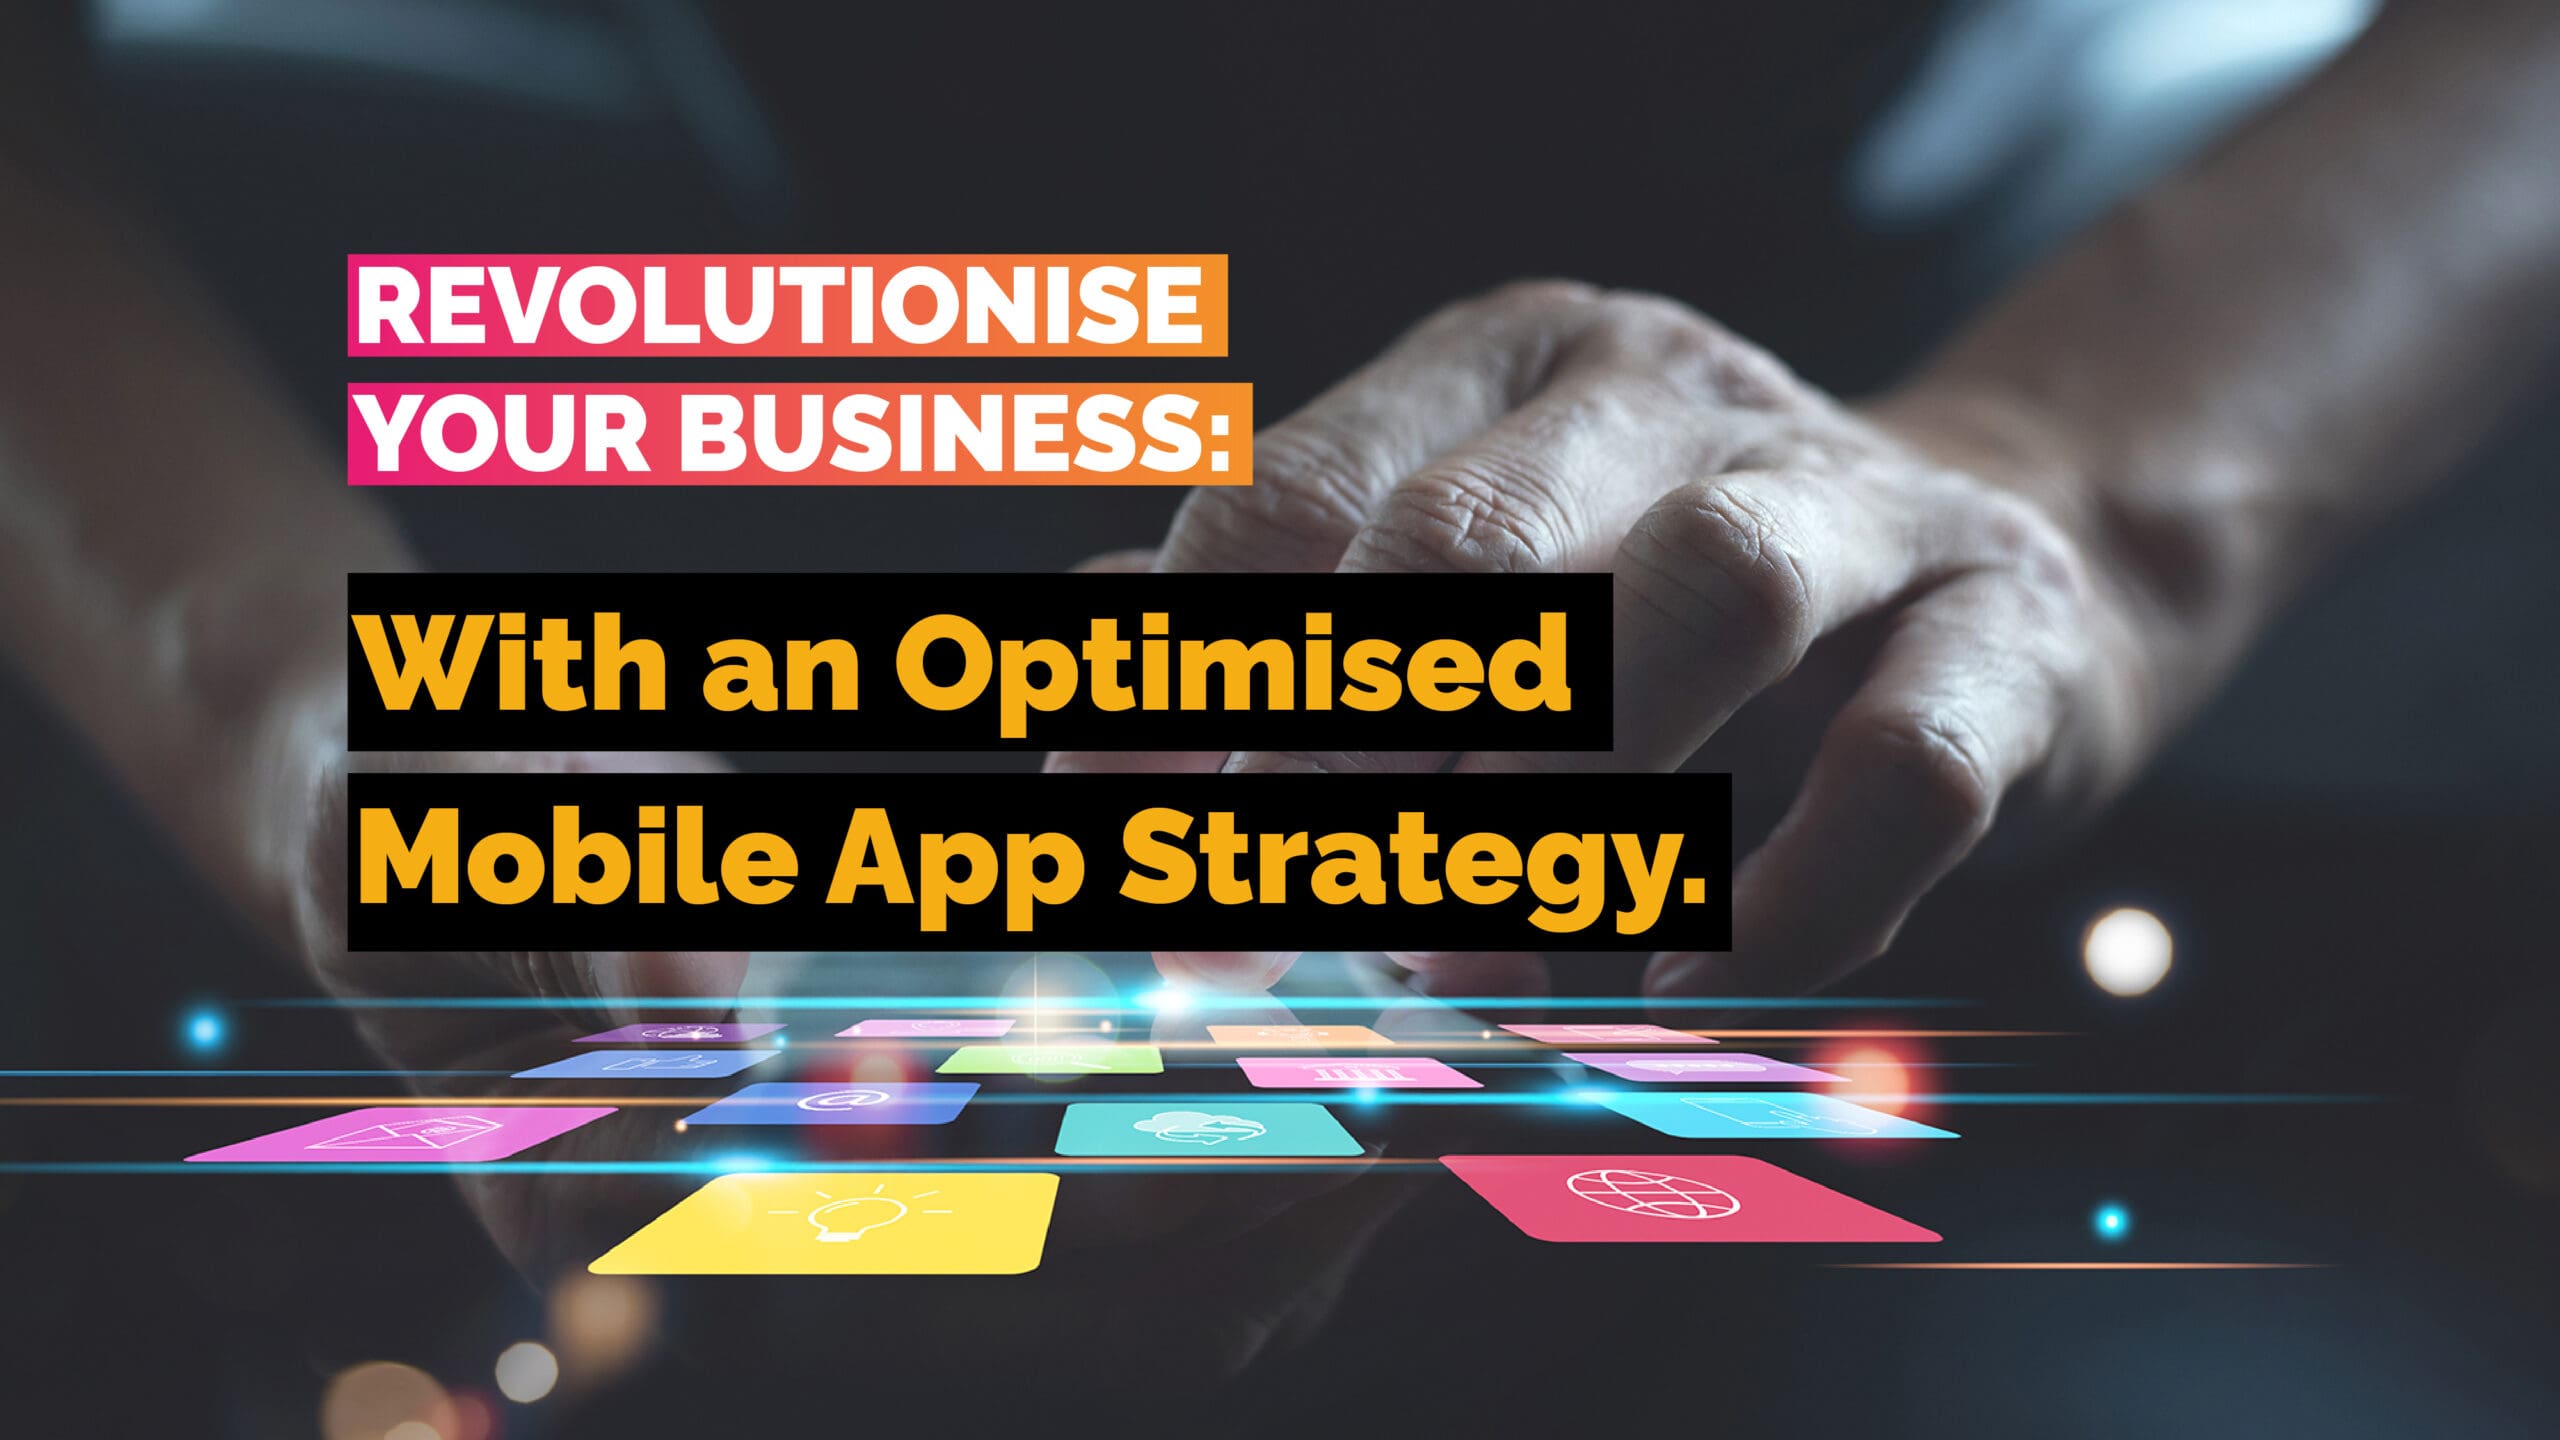 Revolutionise Your Business with an Optimised Mobile App Strategy